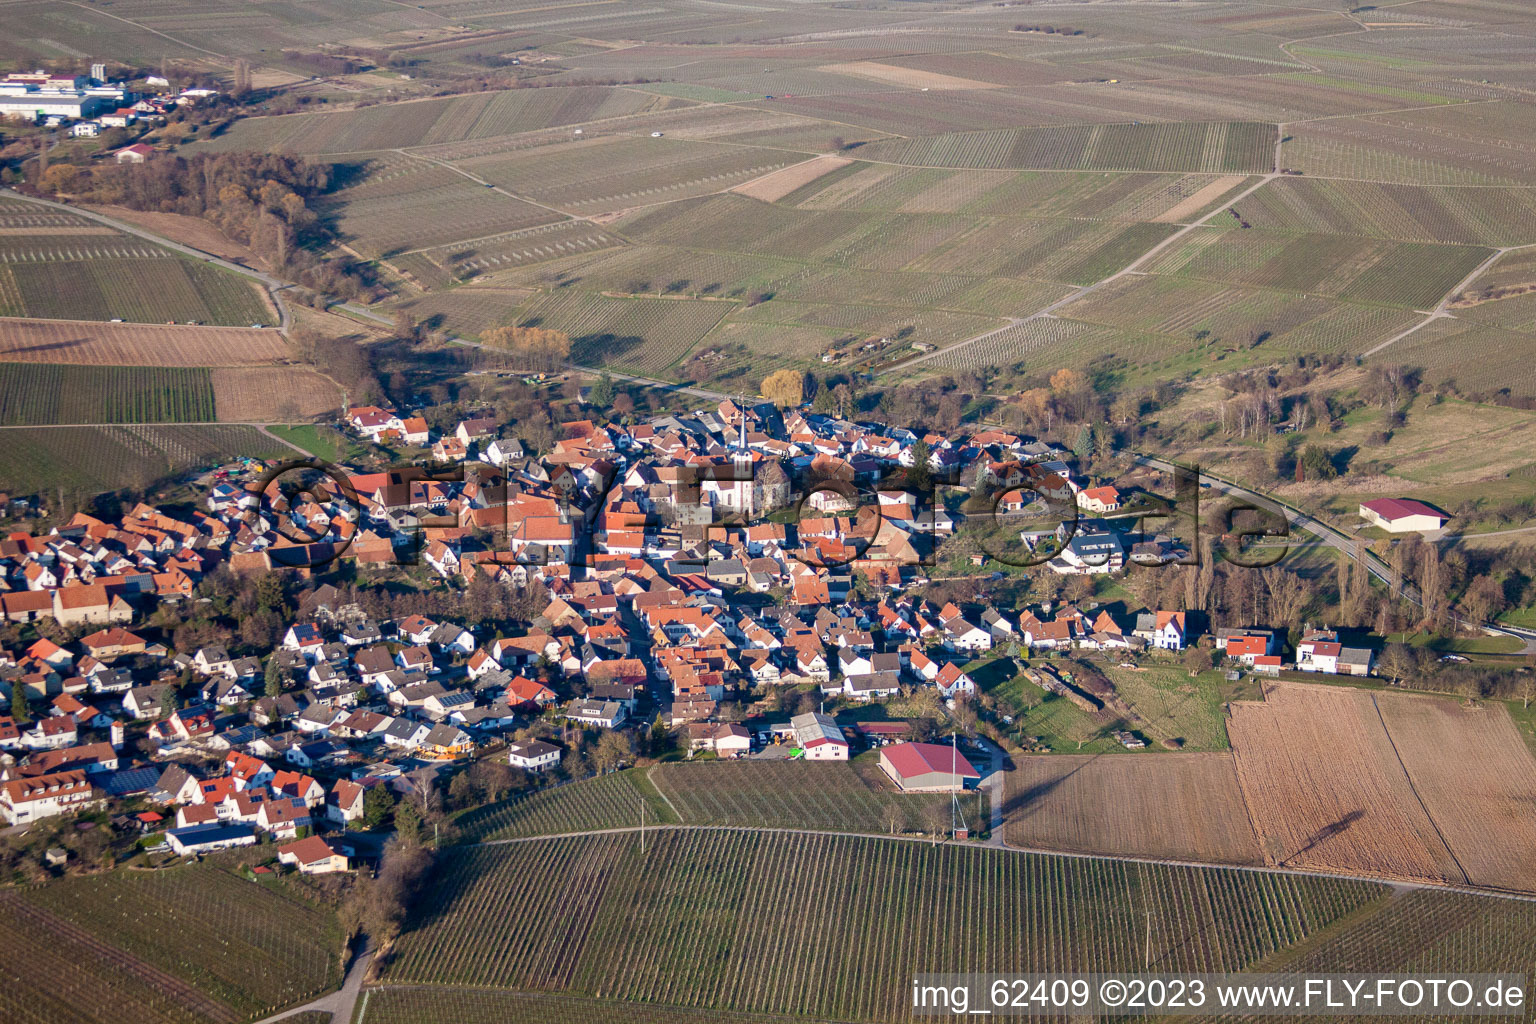 Göcklingen in the state Rhineland-Palatinate, Germany seen from above